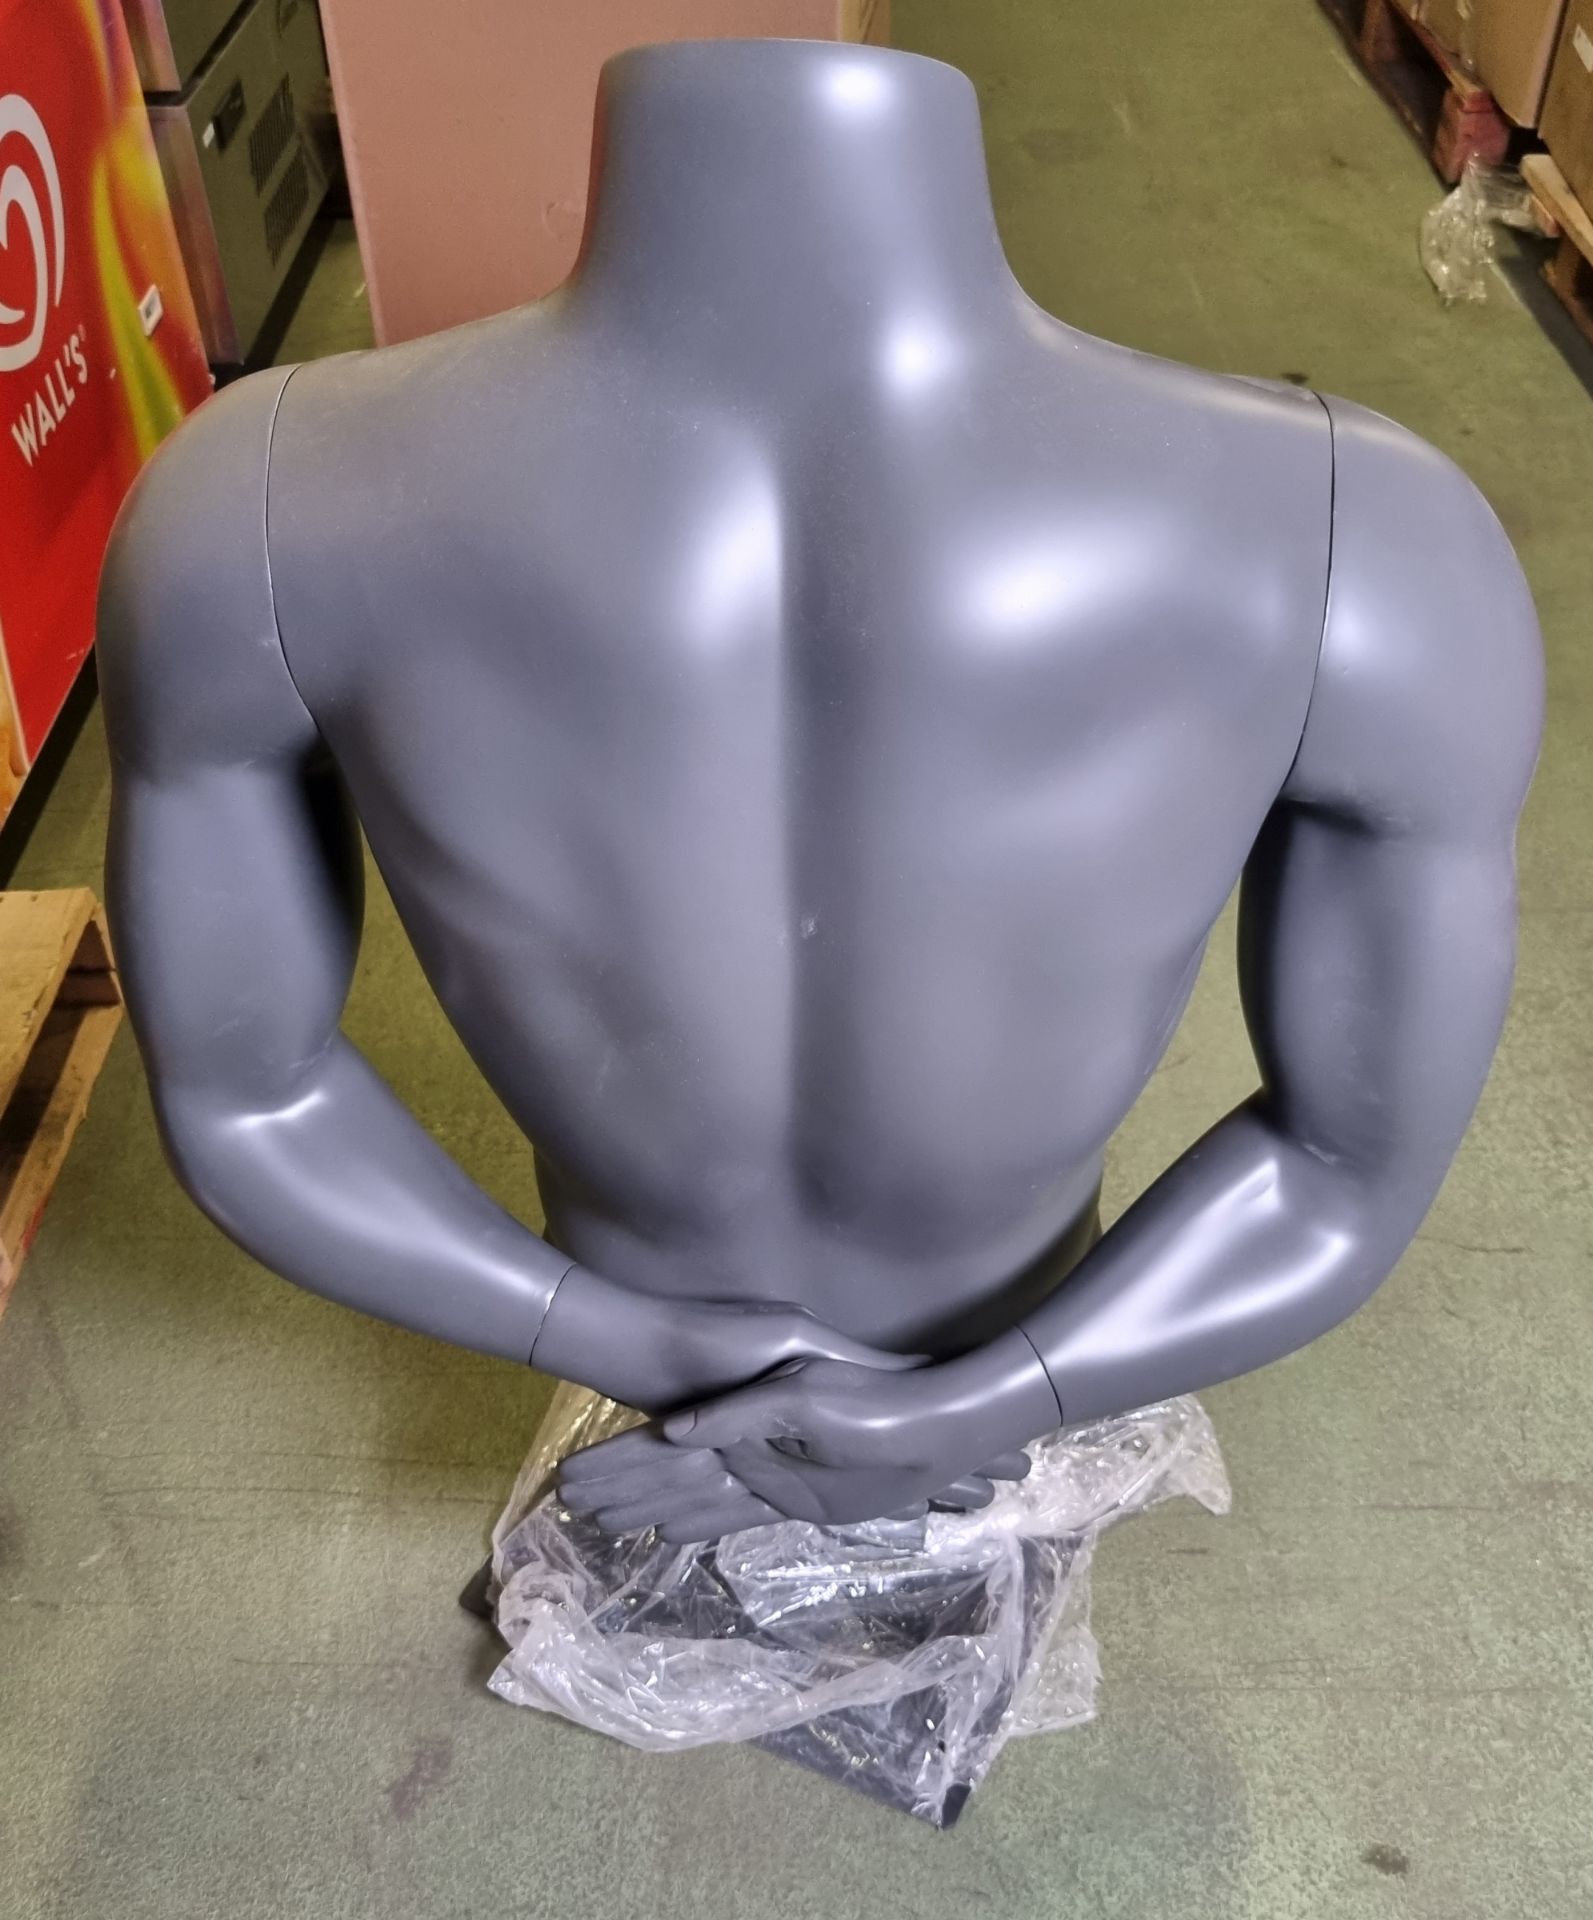 7x Male bust mannequins - Image 5 of 5